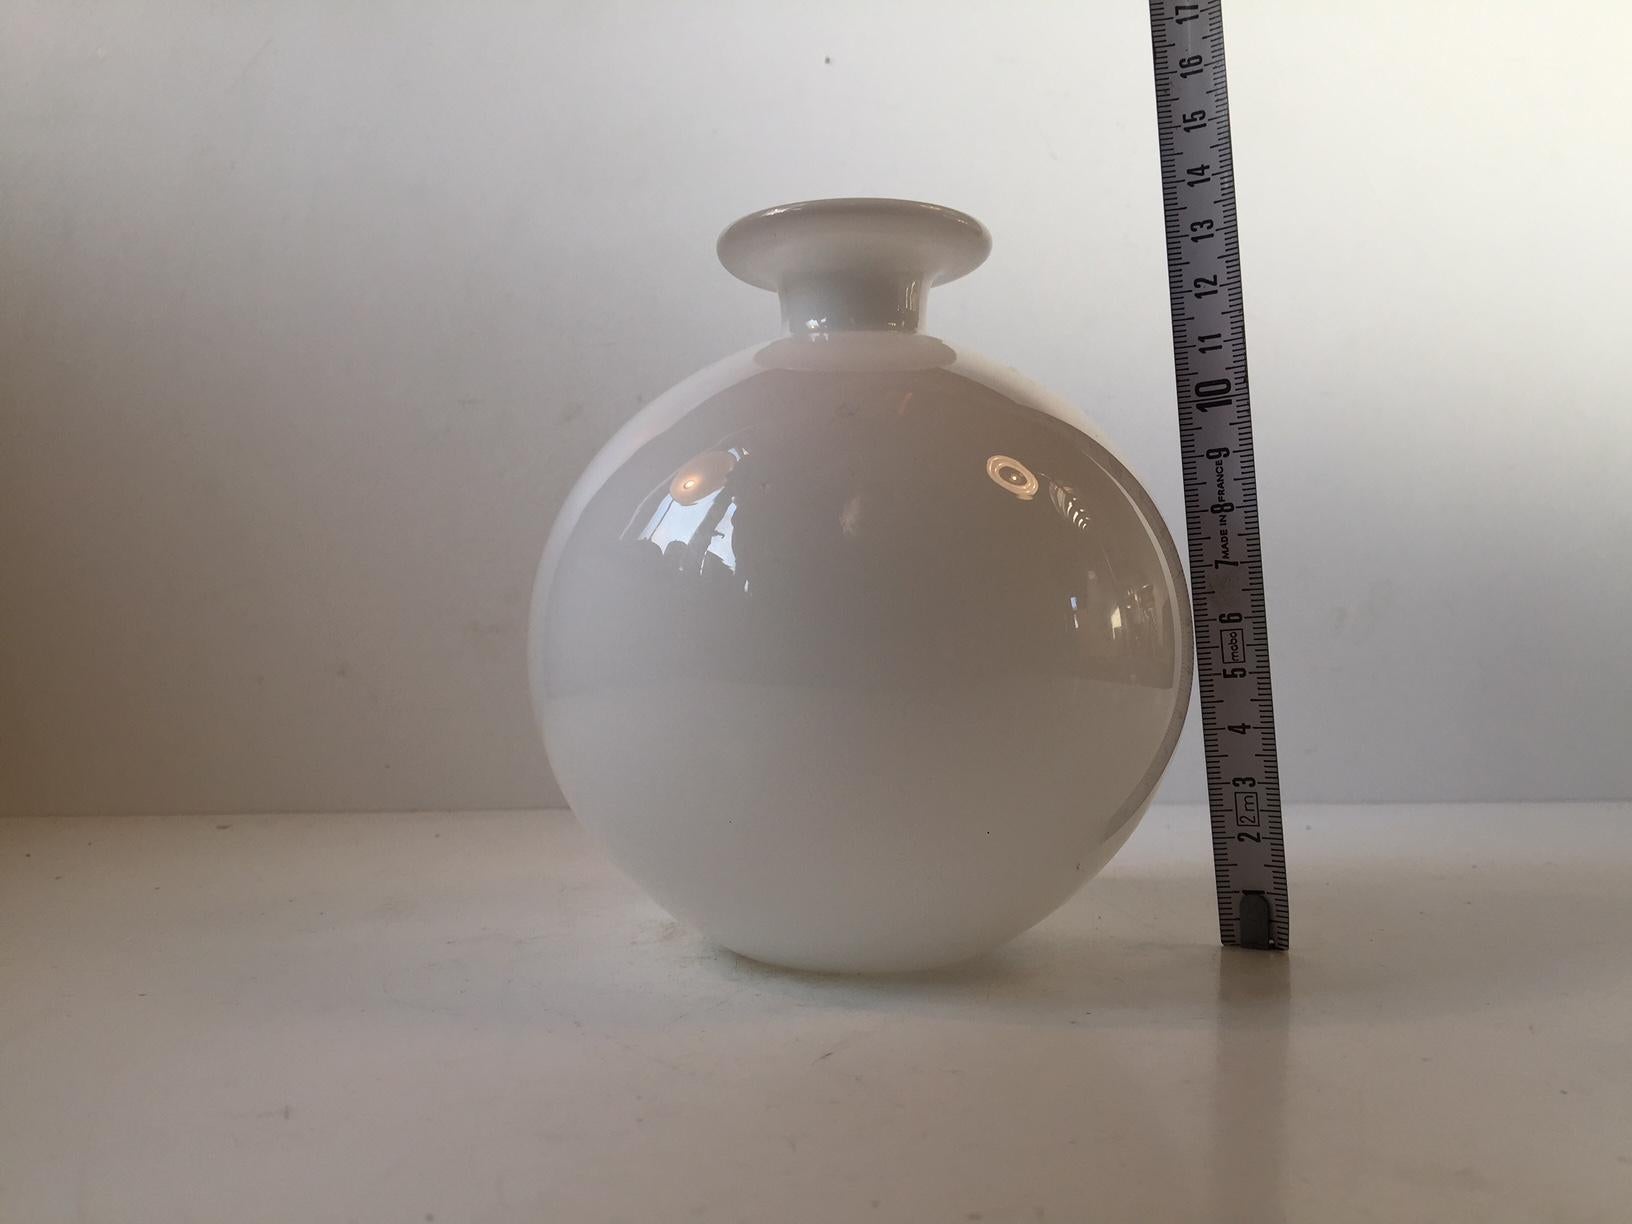 Danish Midcentury 'Carnaby' Ball Vase by Per Lütken for Holmegaard, 1970s In Good Condition For Sale In Esbjerg, DK